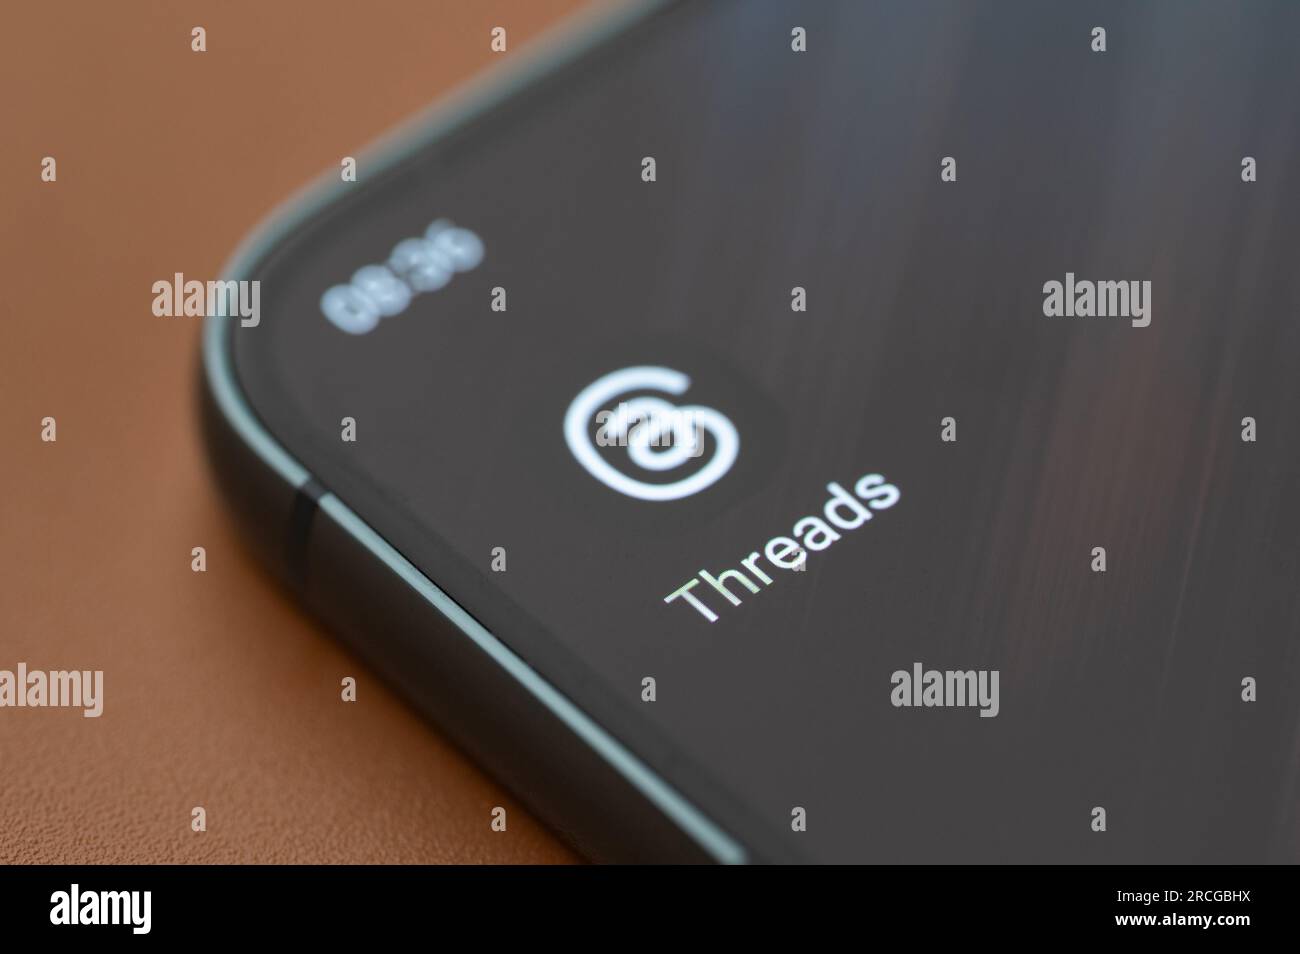 New York, USA - July 7, 2023: Threads icon app logo on smartphone screen close up view Stock Photo